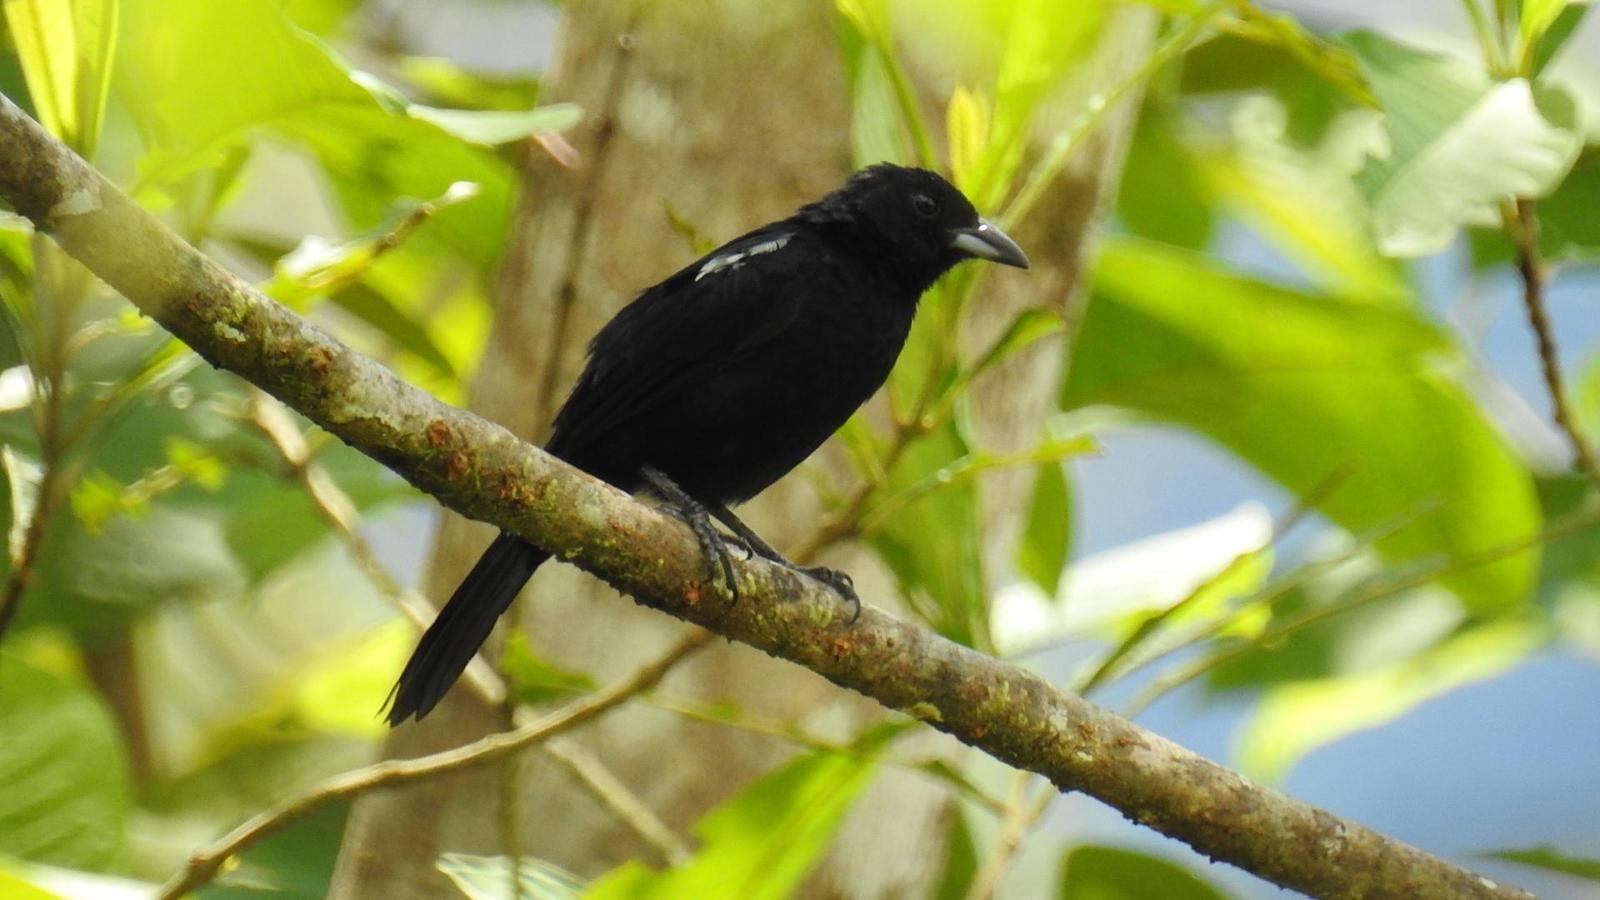 White-shouldered Tanager Photo by Julio Delgado